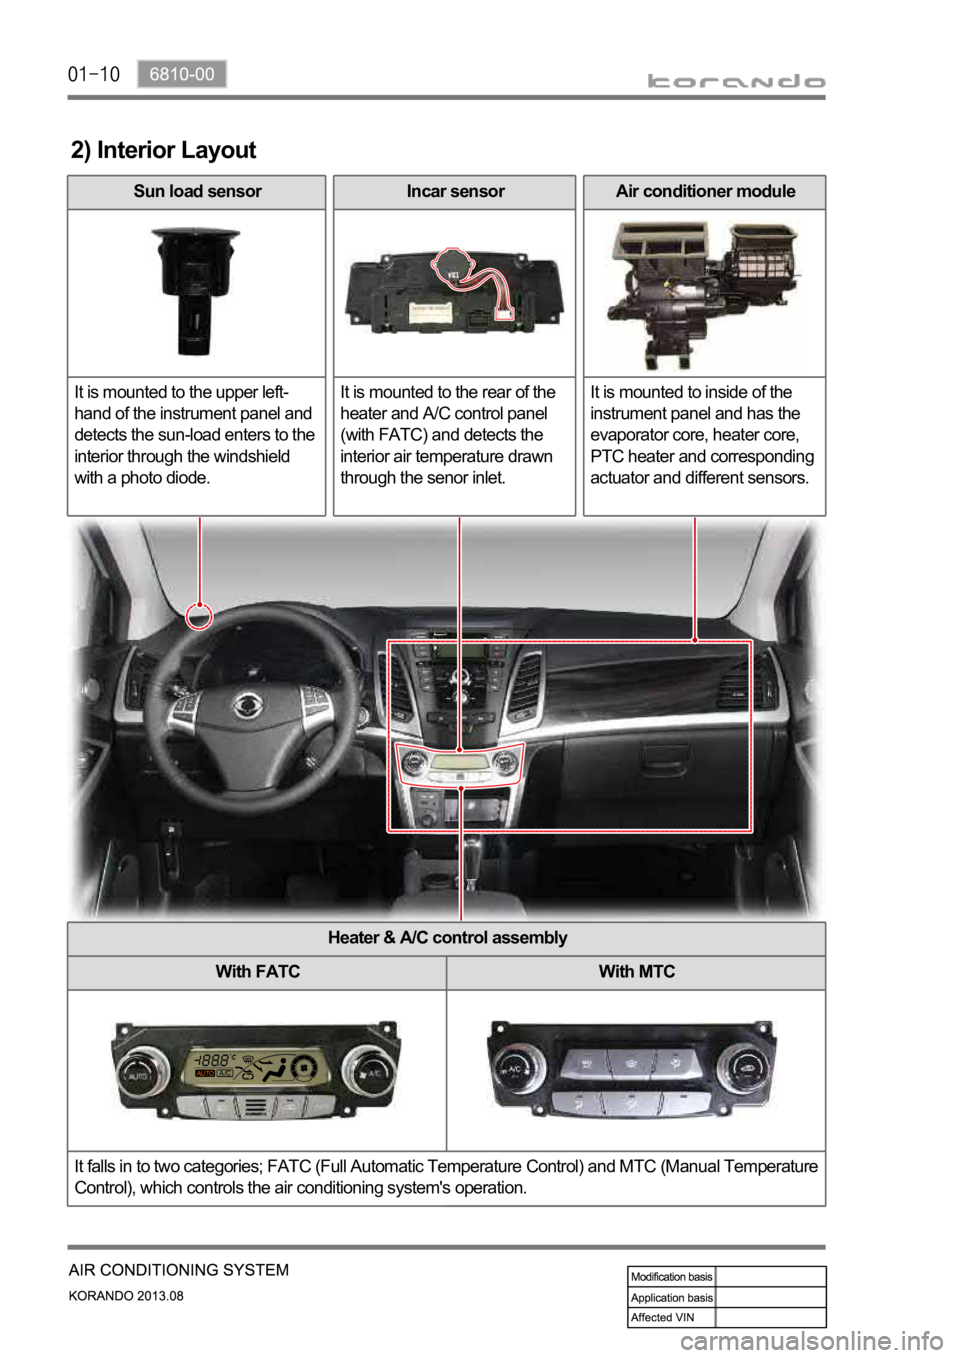 SSANGYONG KORANDO 2013  Service Manual 2) Interior Layout
Sun load sensor
It is mounted to the upper left-
hand of the instrument panel and 
detects the sun-load enters to the 
interior through the windshield 
with a photo diode. Incar sen